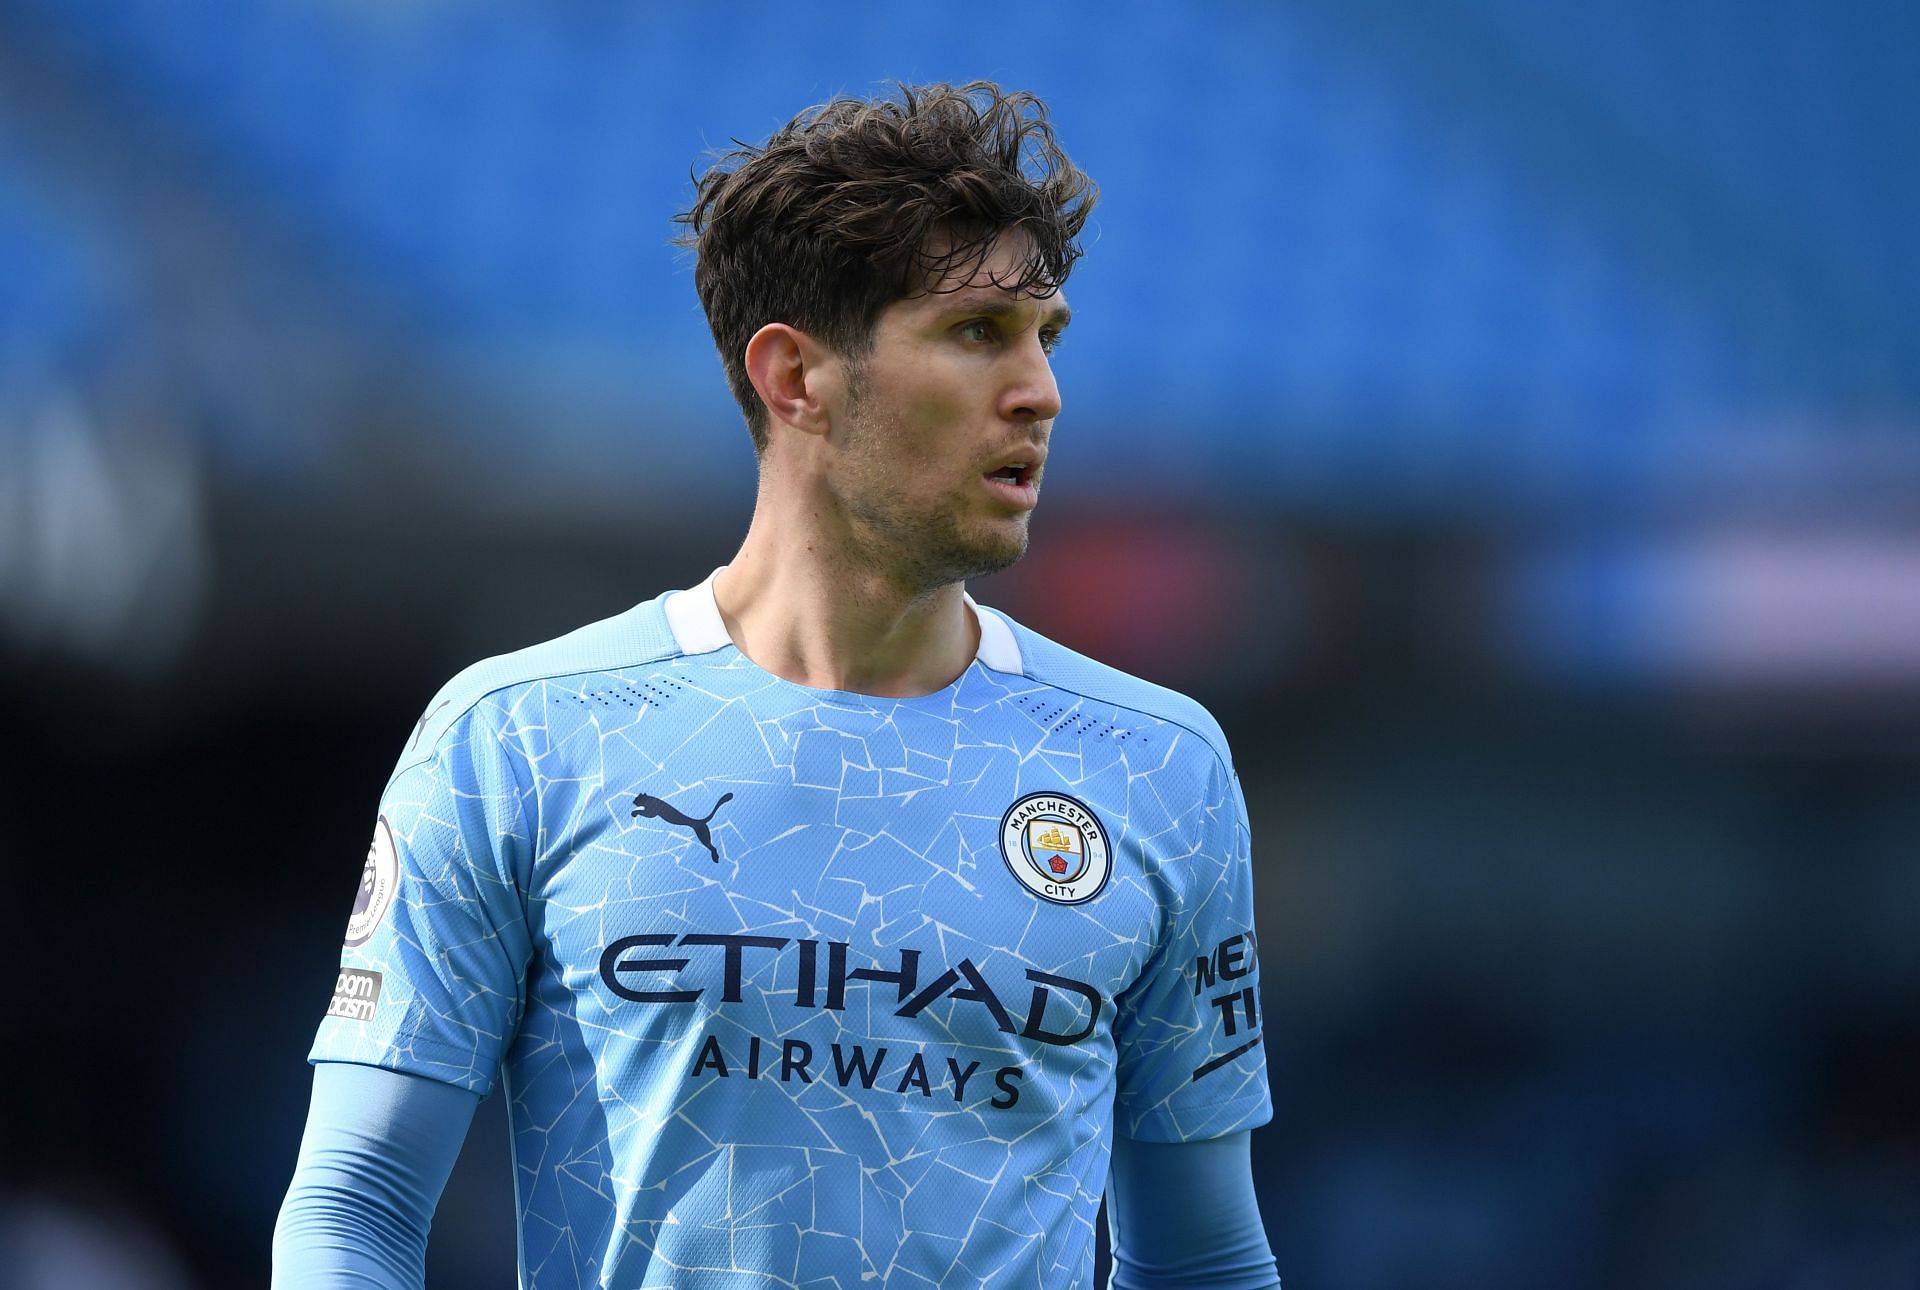 John Stones made his first Manchester City appearance of the season against Burnley.